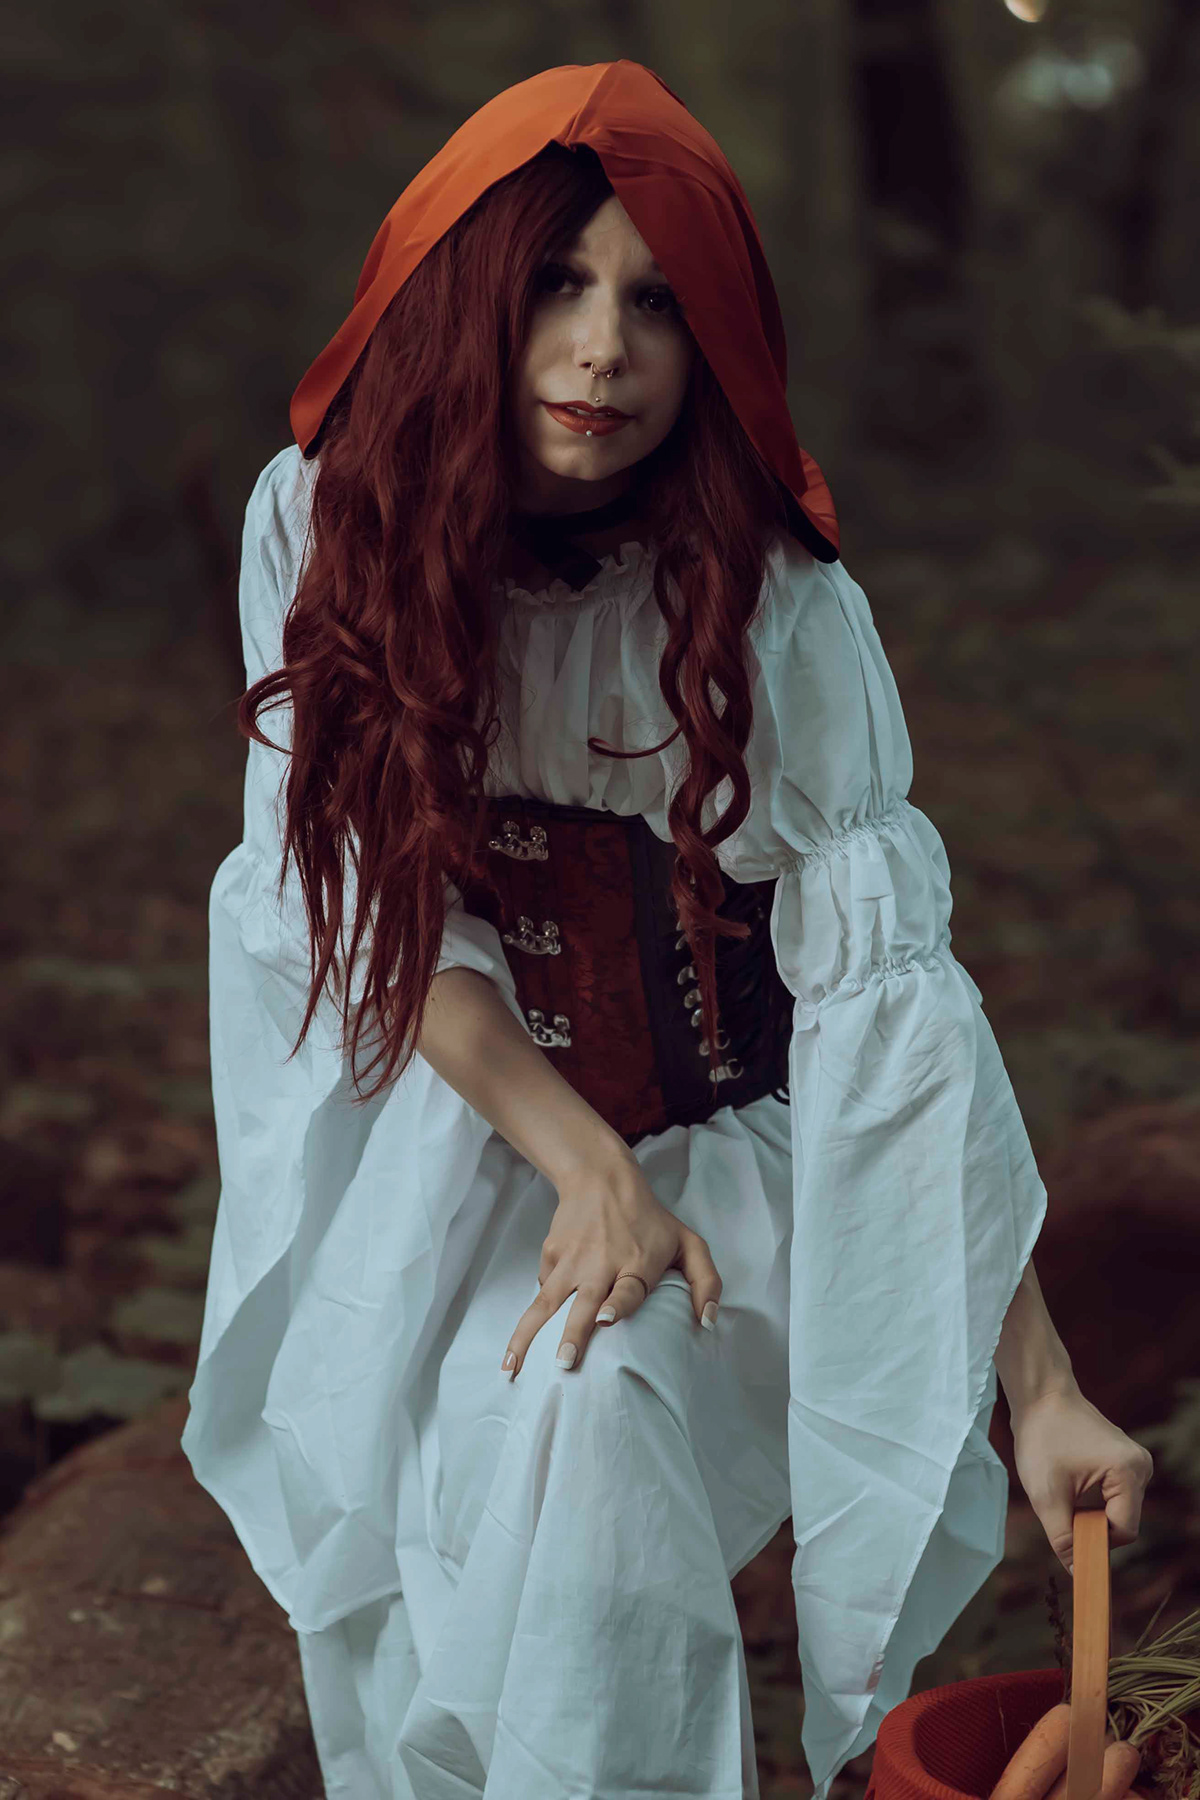 DLESIAK_PHOTOGRAPHY DLESIAKPHOTOGRAPHY fairy tale fairytale fantasy Karly Wireman Red riding hood Red Ridinghood redriding hood redridinghood